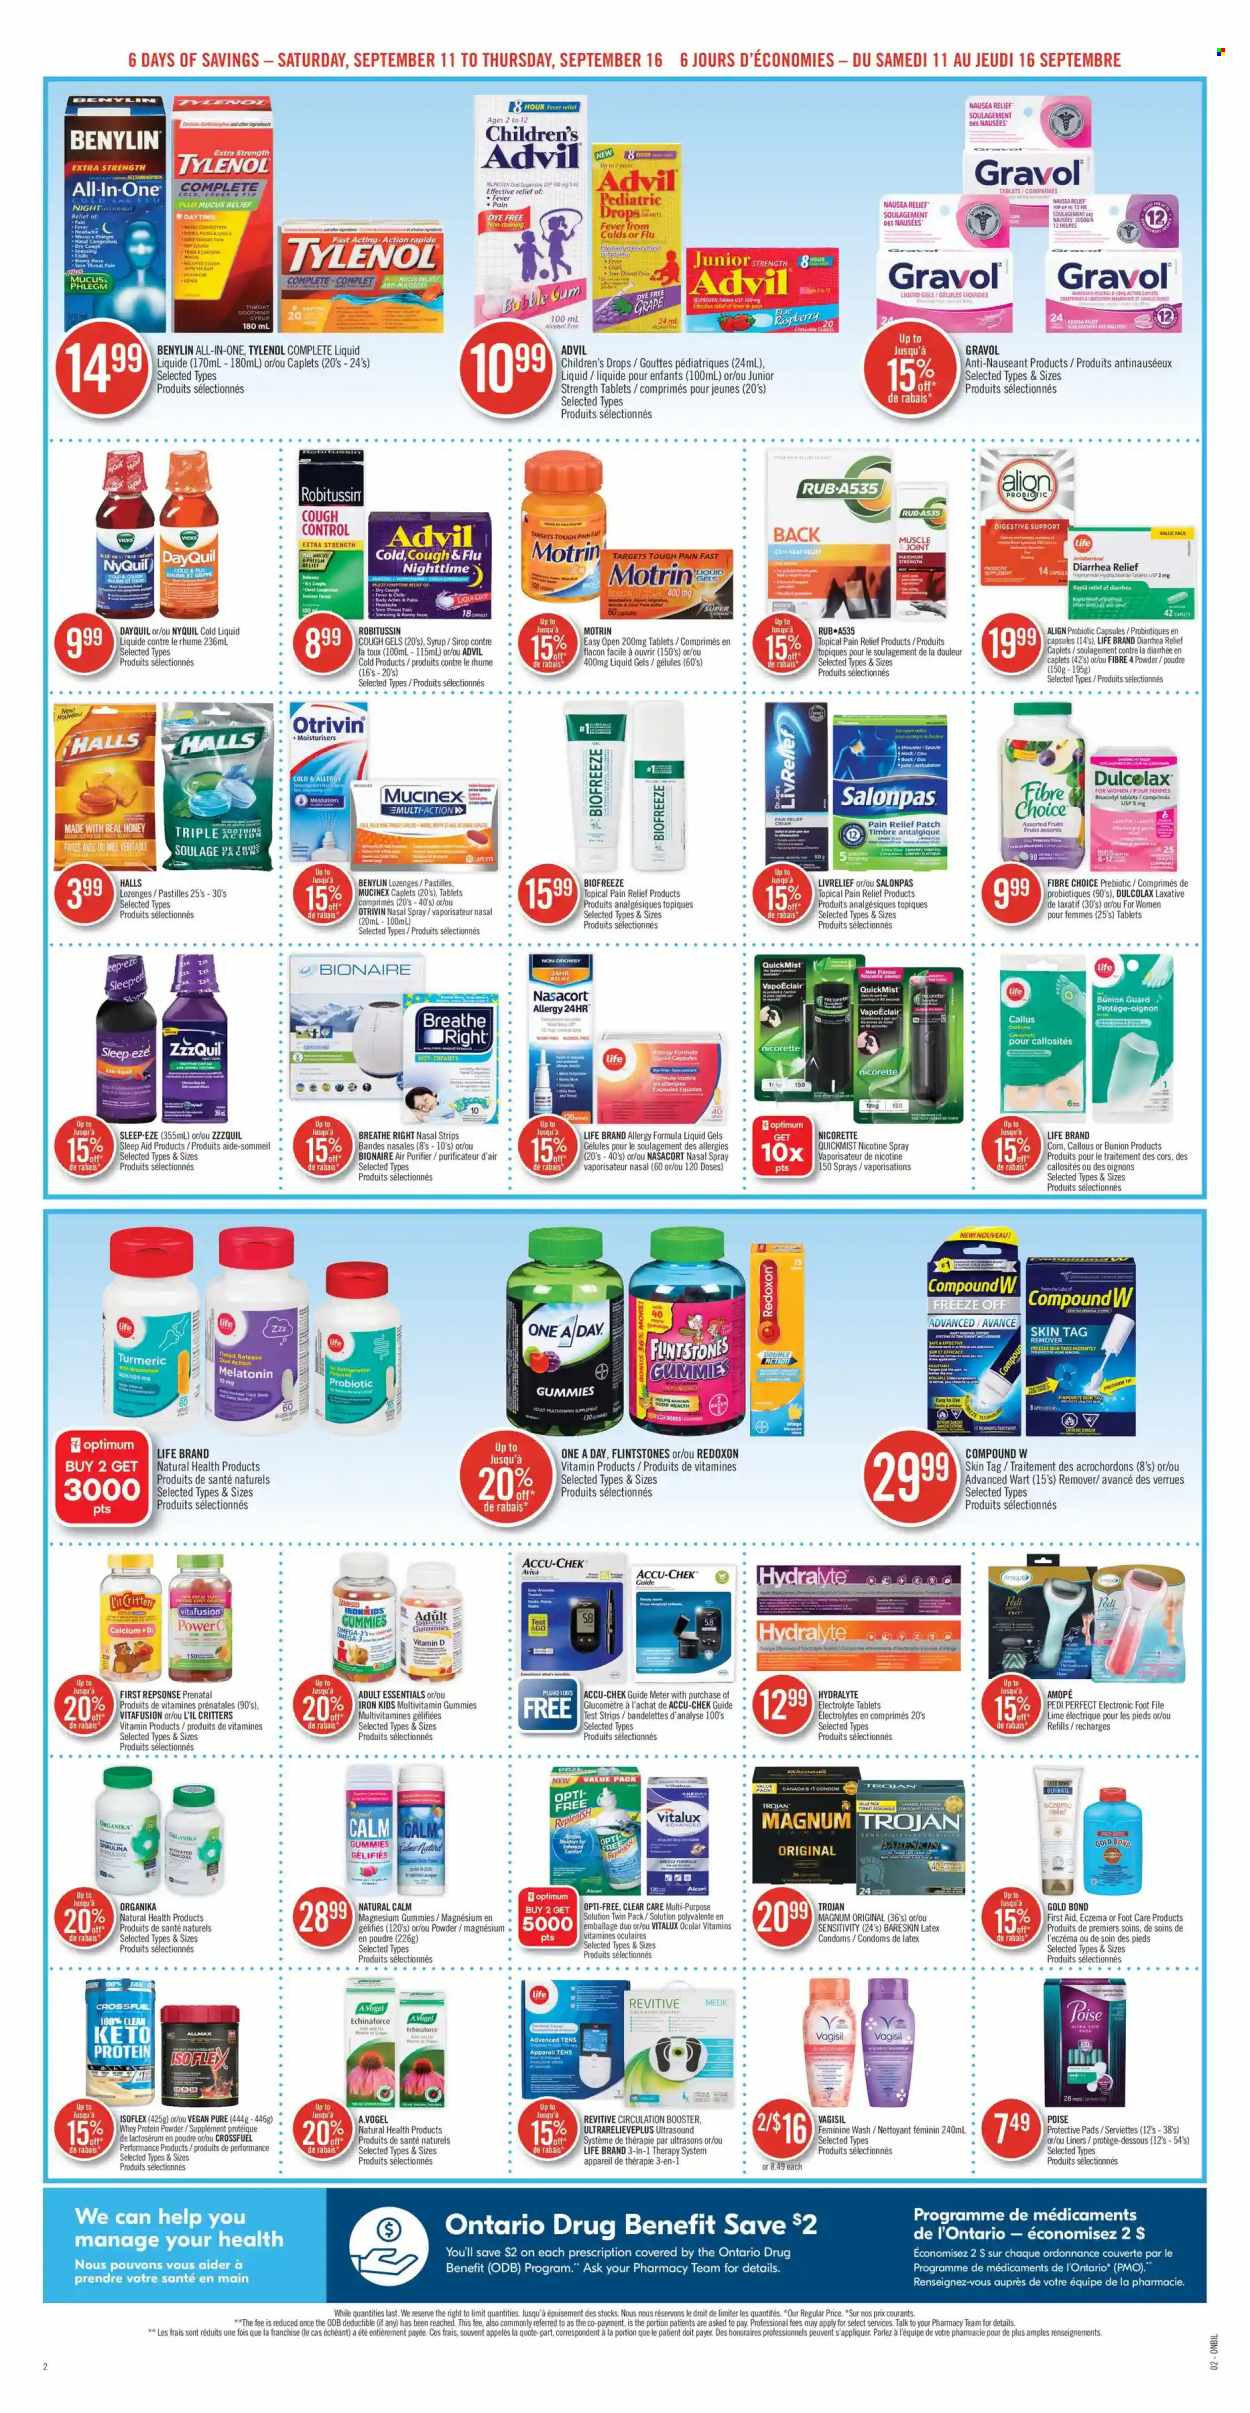 thumbnail - Shoppers Drug Mart Flyer - September 11, 2021 - September 16, 2021 - Sales products - Halls, bubblegum, pastilles, corn, turmeric, honey, syrup, Bai, foot care, Revitive, pain relief, Clear Care, DayQuil, Dulcolax, magnesium, Mucinex, multivitamin, Nicorette, Tylenol, Vitafusion, ZzzQuil, Prenatal, NyQuil, Omega-3, activated charcoal, Advil Rapid, whey protein, Echinaforce, laxative, Benylin, nasal spray, Motrin, calcium, Robitussin. Page 2.